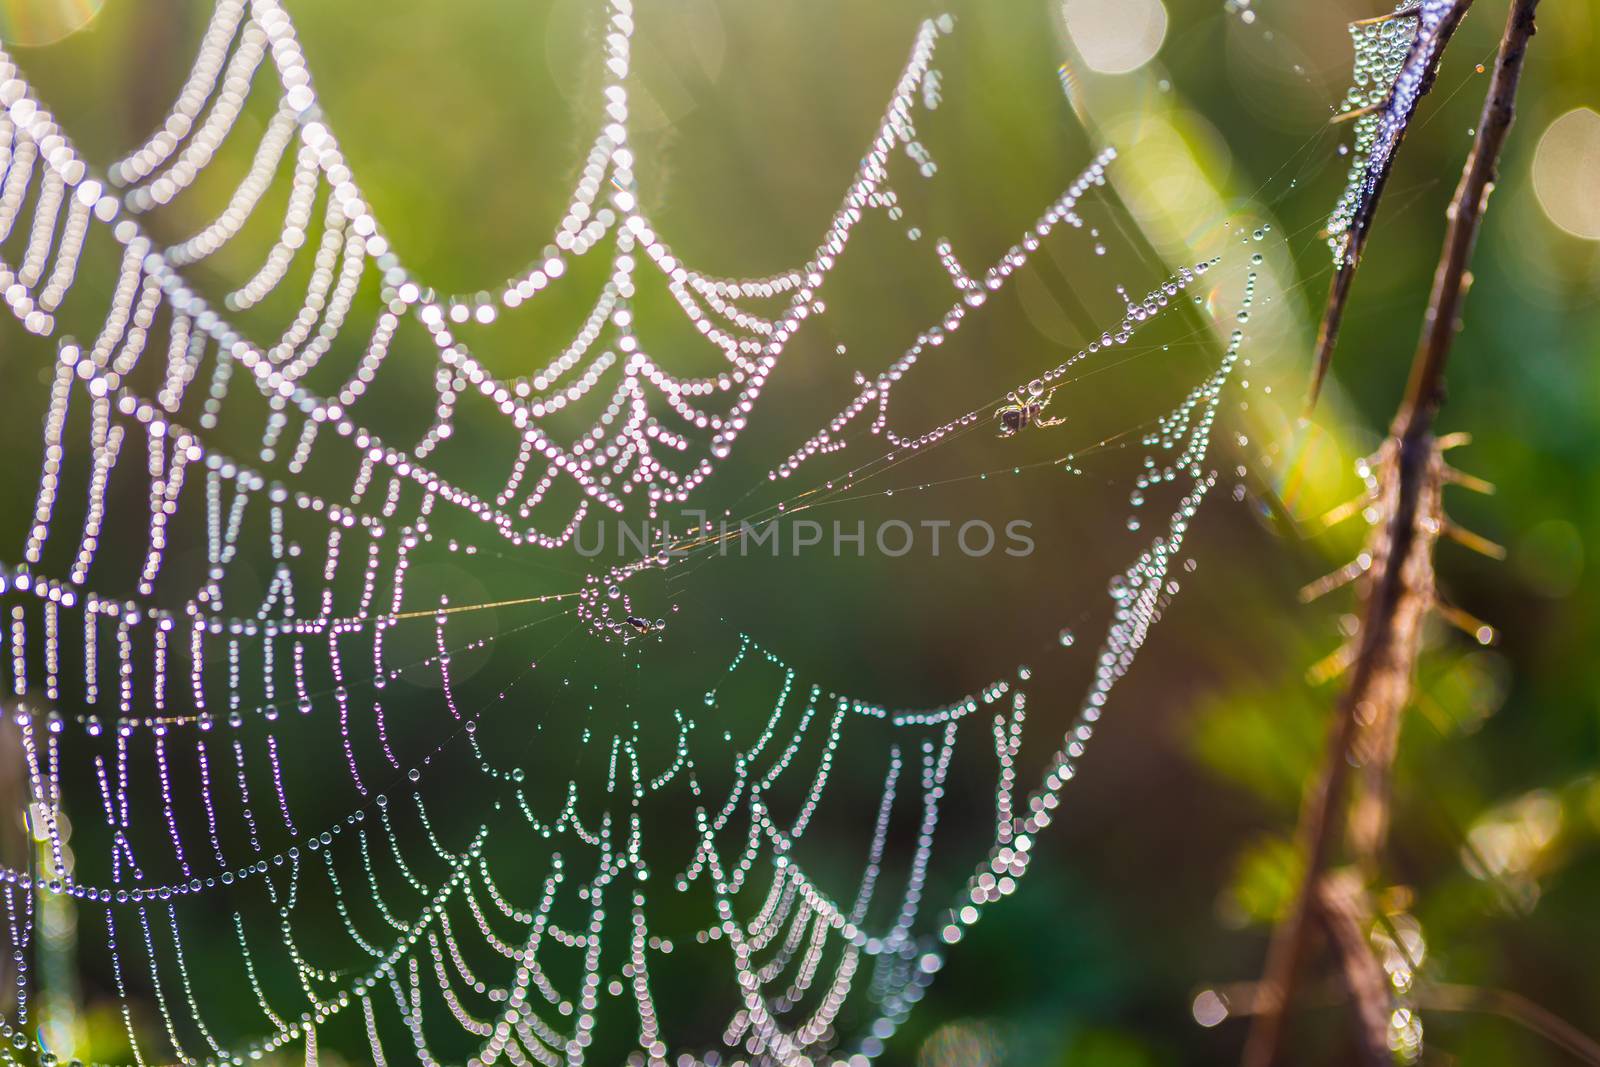 spider web in drops of dew field close-up